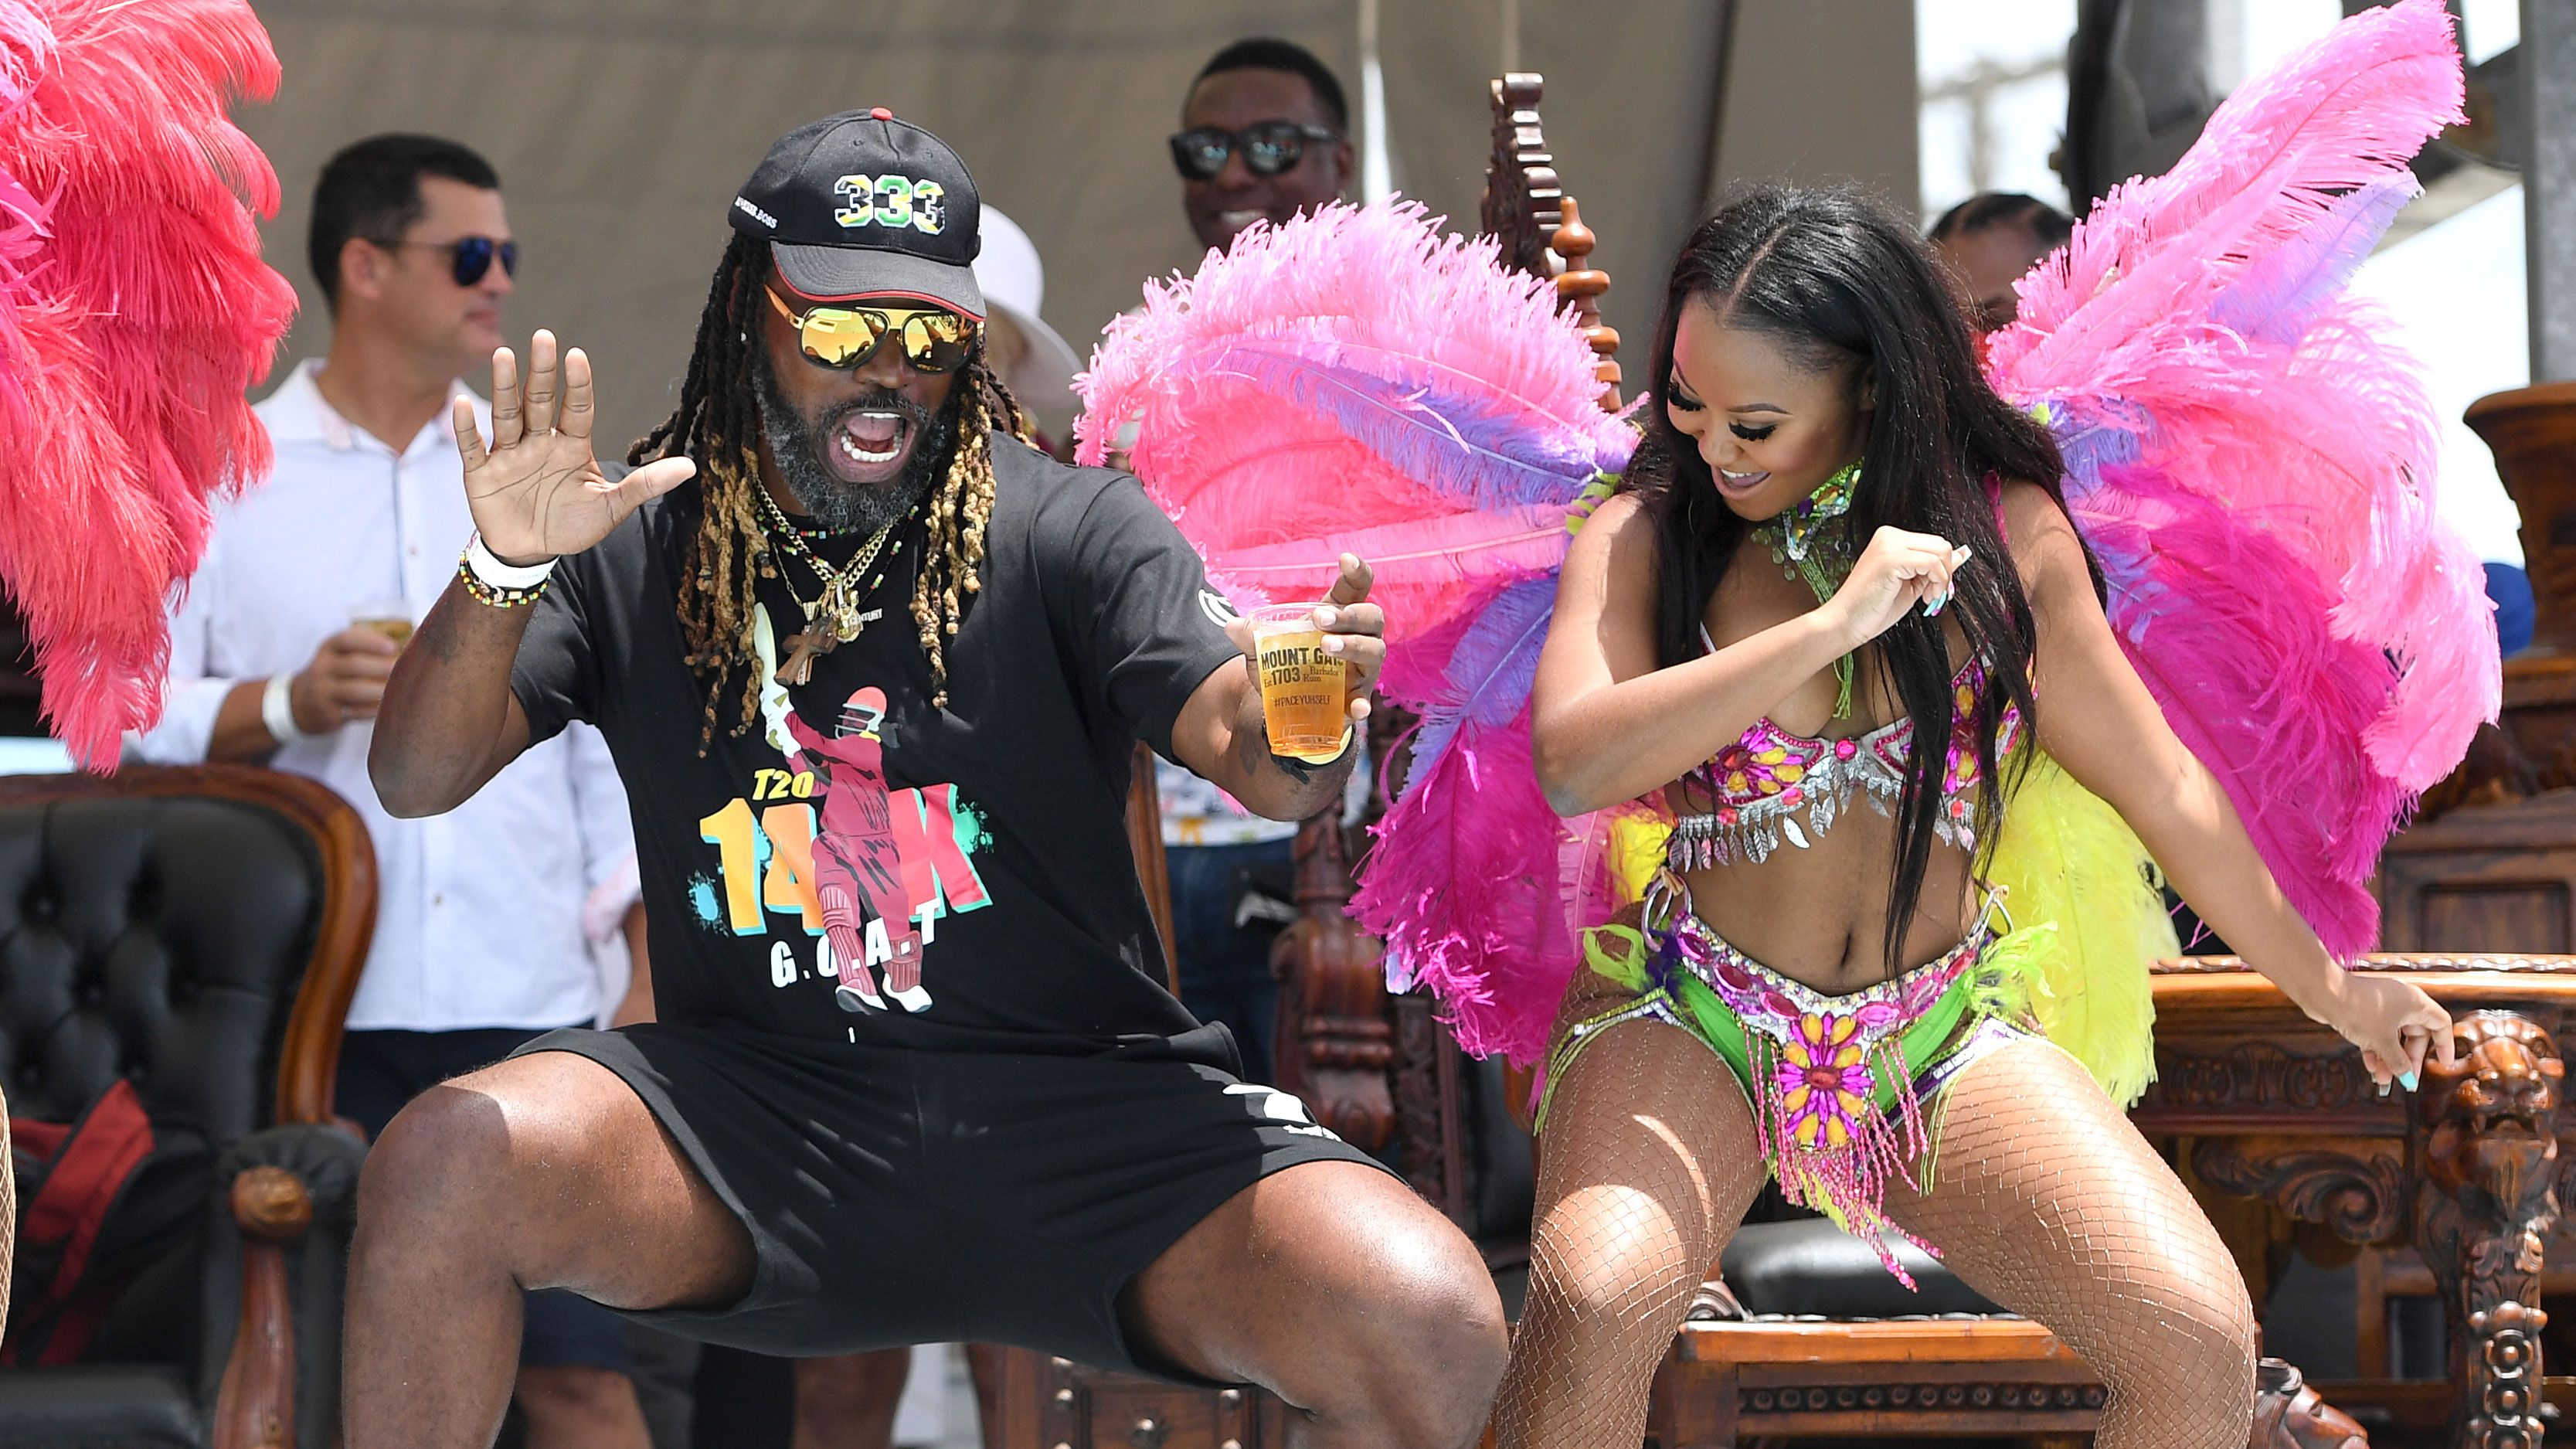 Former West Indies captain Chris Gayle gets jiggy with dancers on the party stand stage during a Test match between West Indies and England at Kensington Oval in march, 2022.